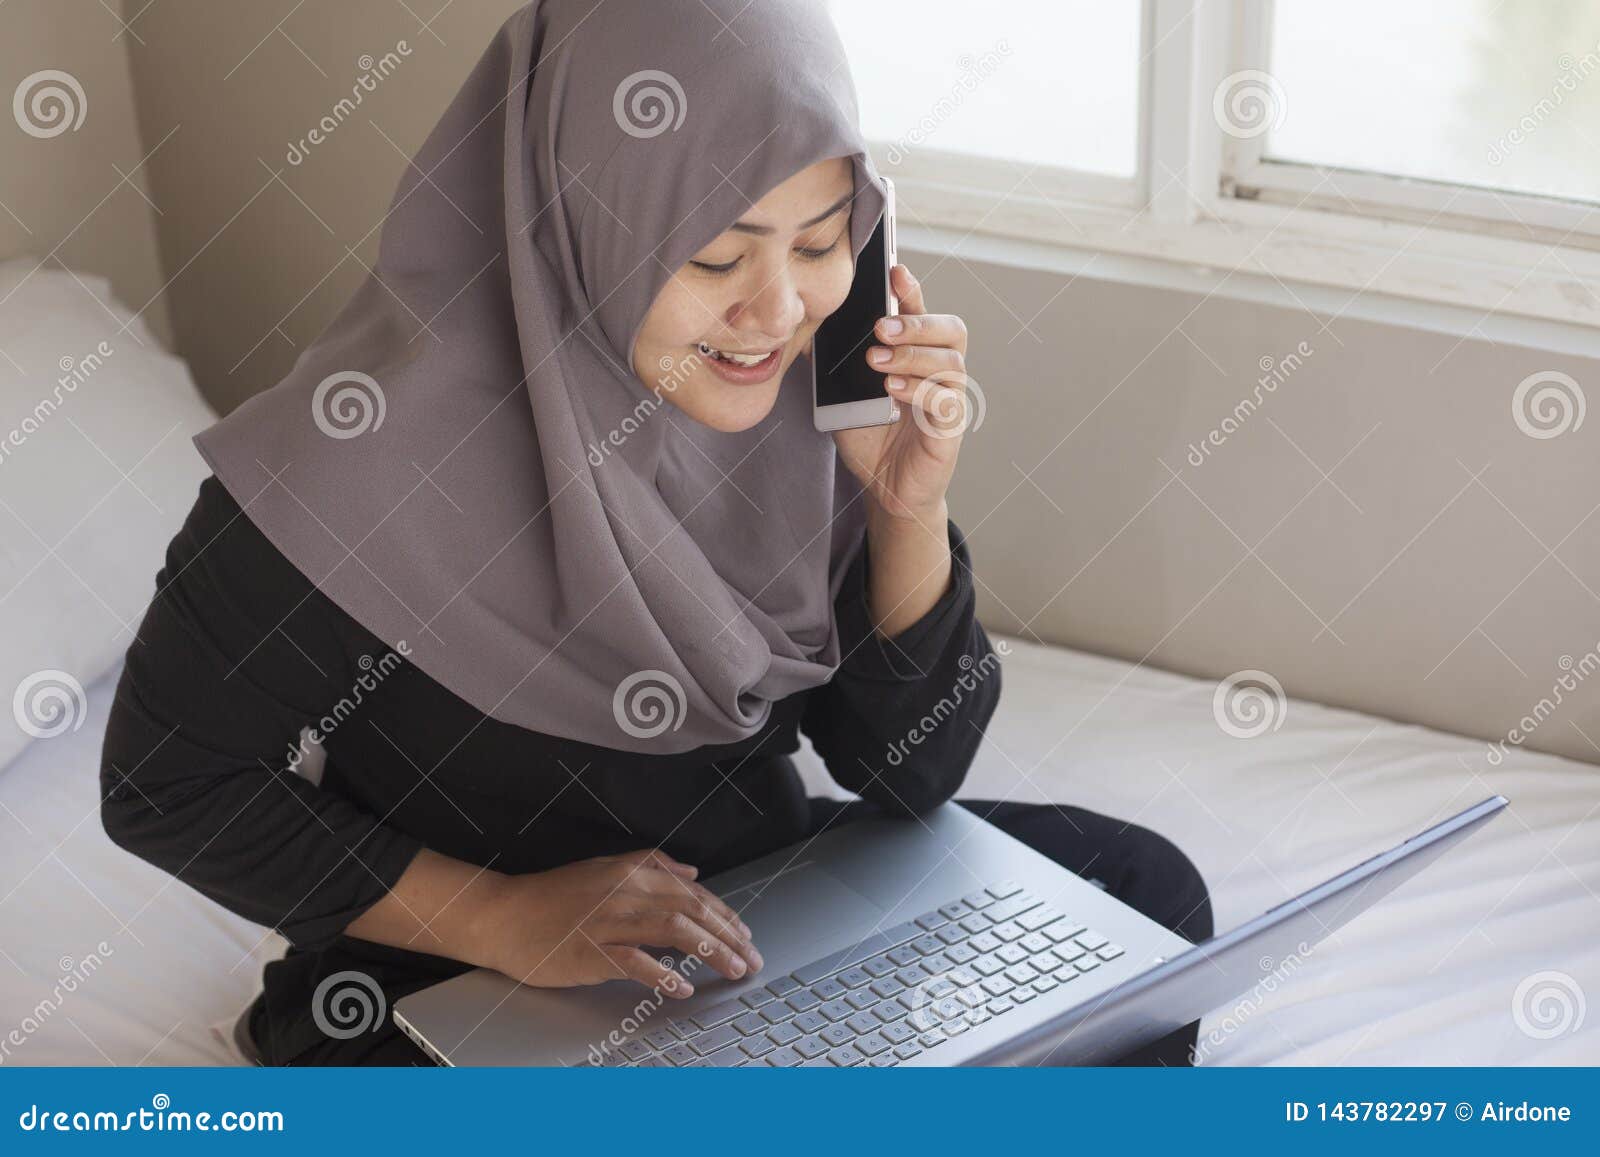 Happy Muslim Woman Working with Laptop and Smart Phone in Her Bedroom ...